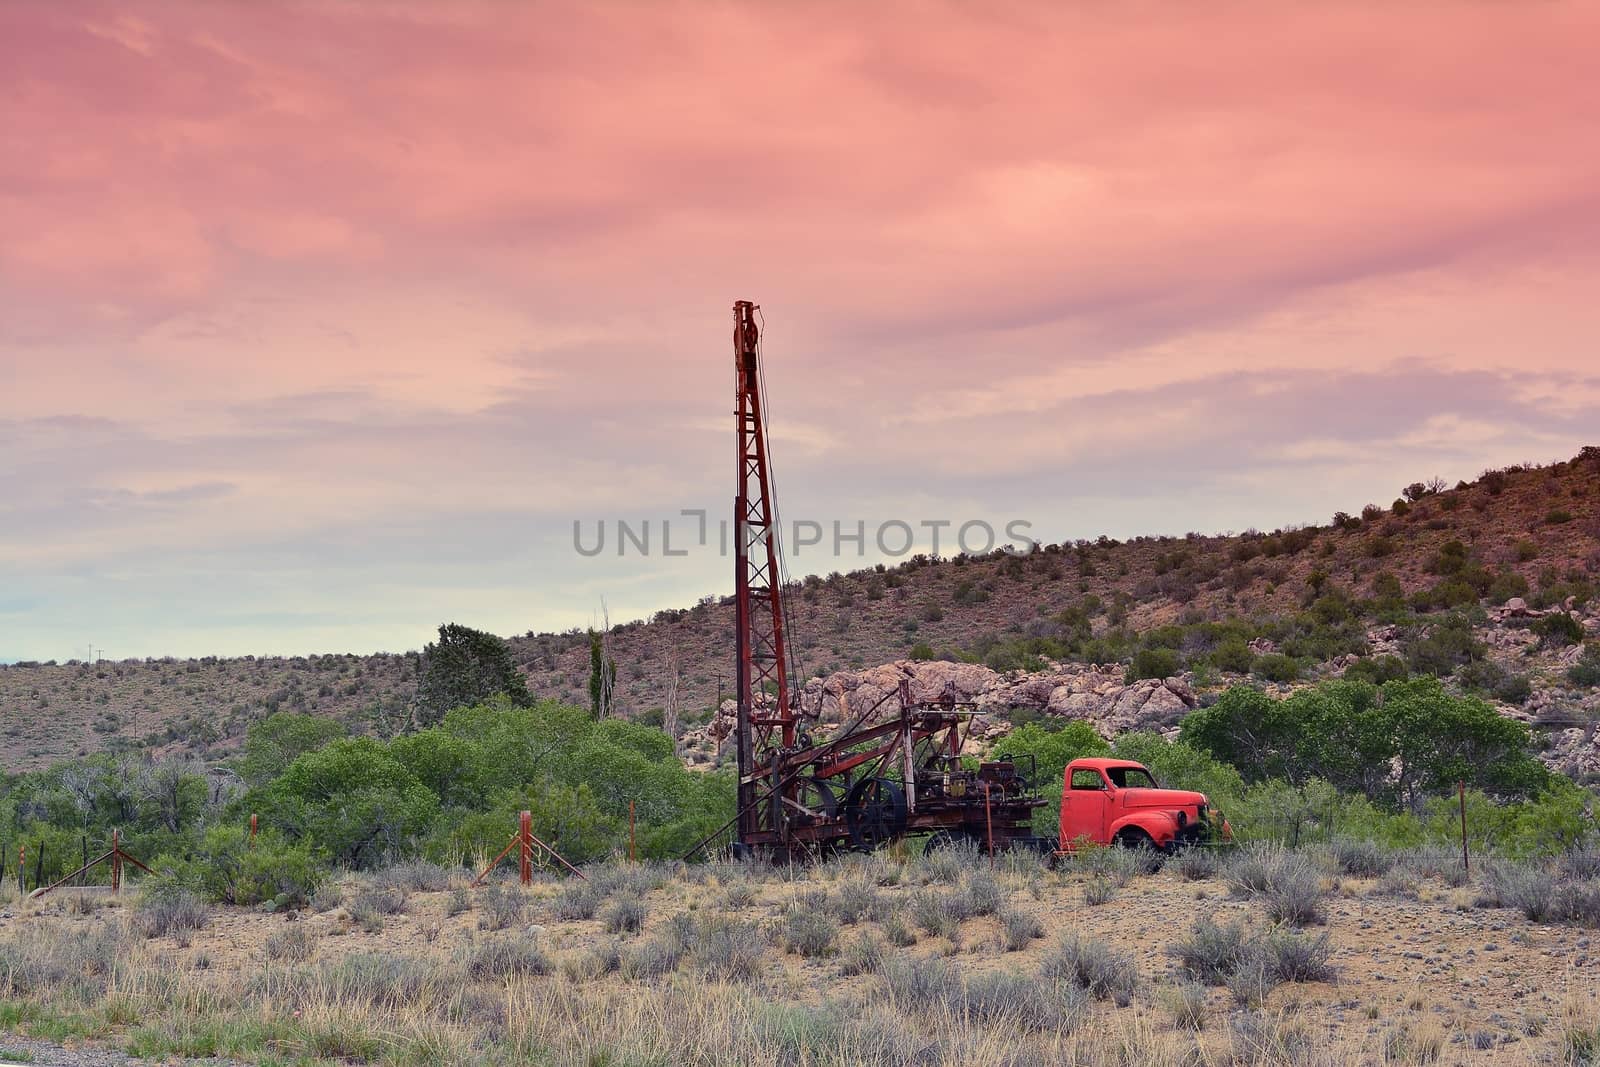 Groundwater hole drilling machine installed on the old truck. in Arizona.